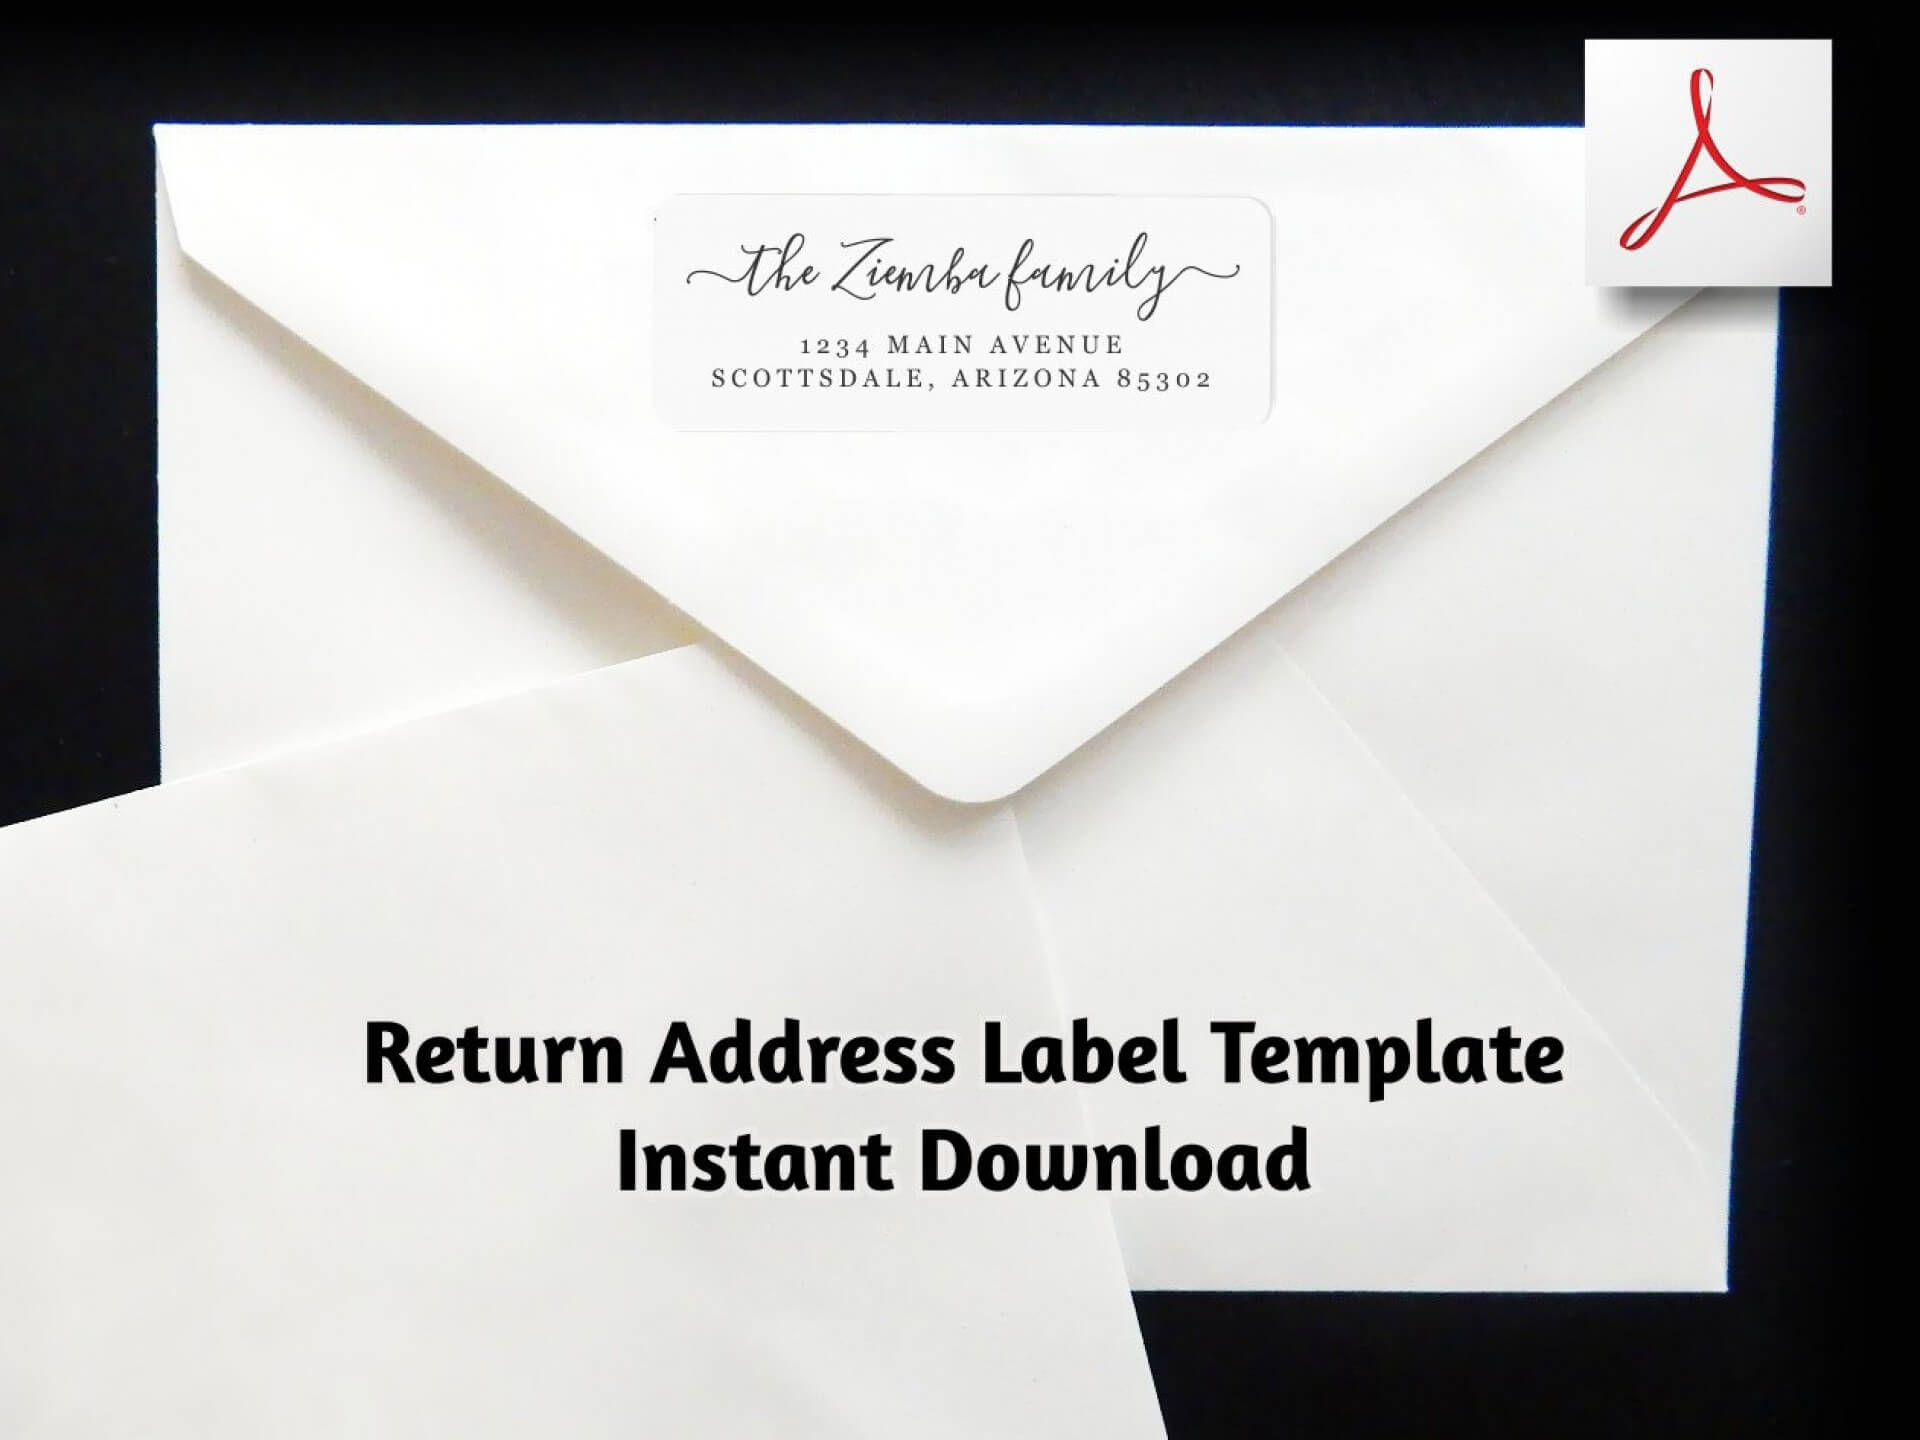 007 Template Ideas Return Address Label Il Fullxfull With Regard To 80 Labels Per Sheet Template